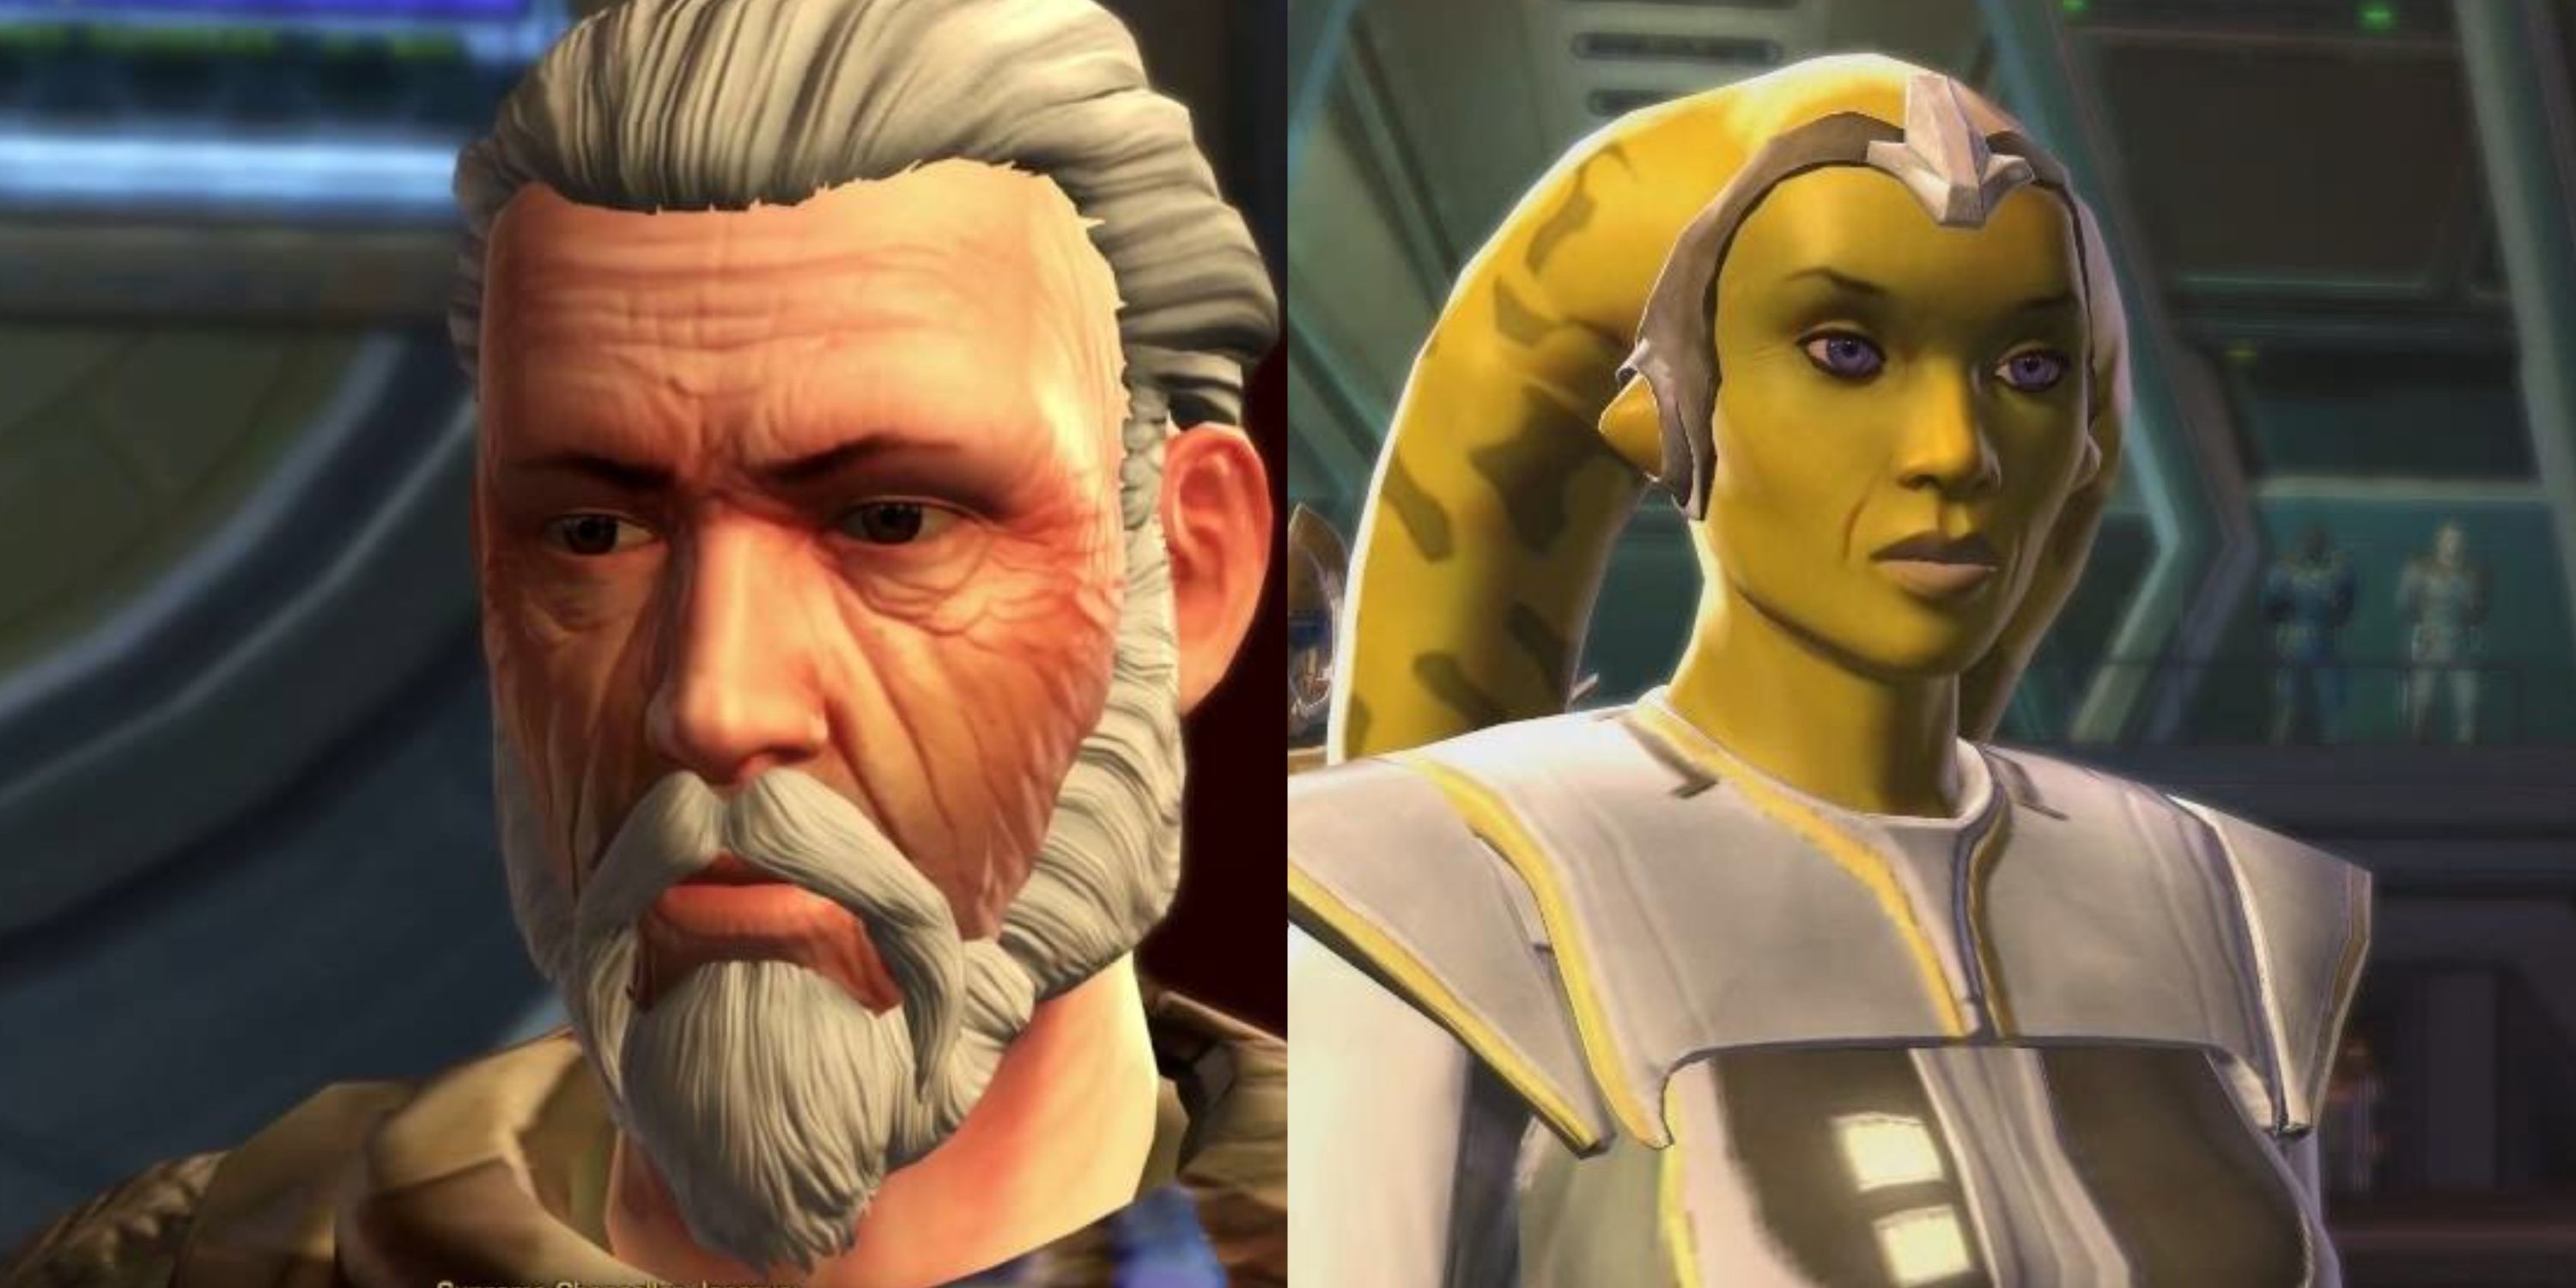 Janarus and Saresh, the former and current Supreme Chancellors in Star Wars: The Old Republic